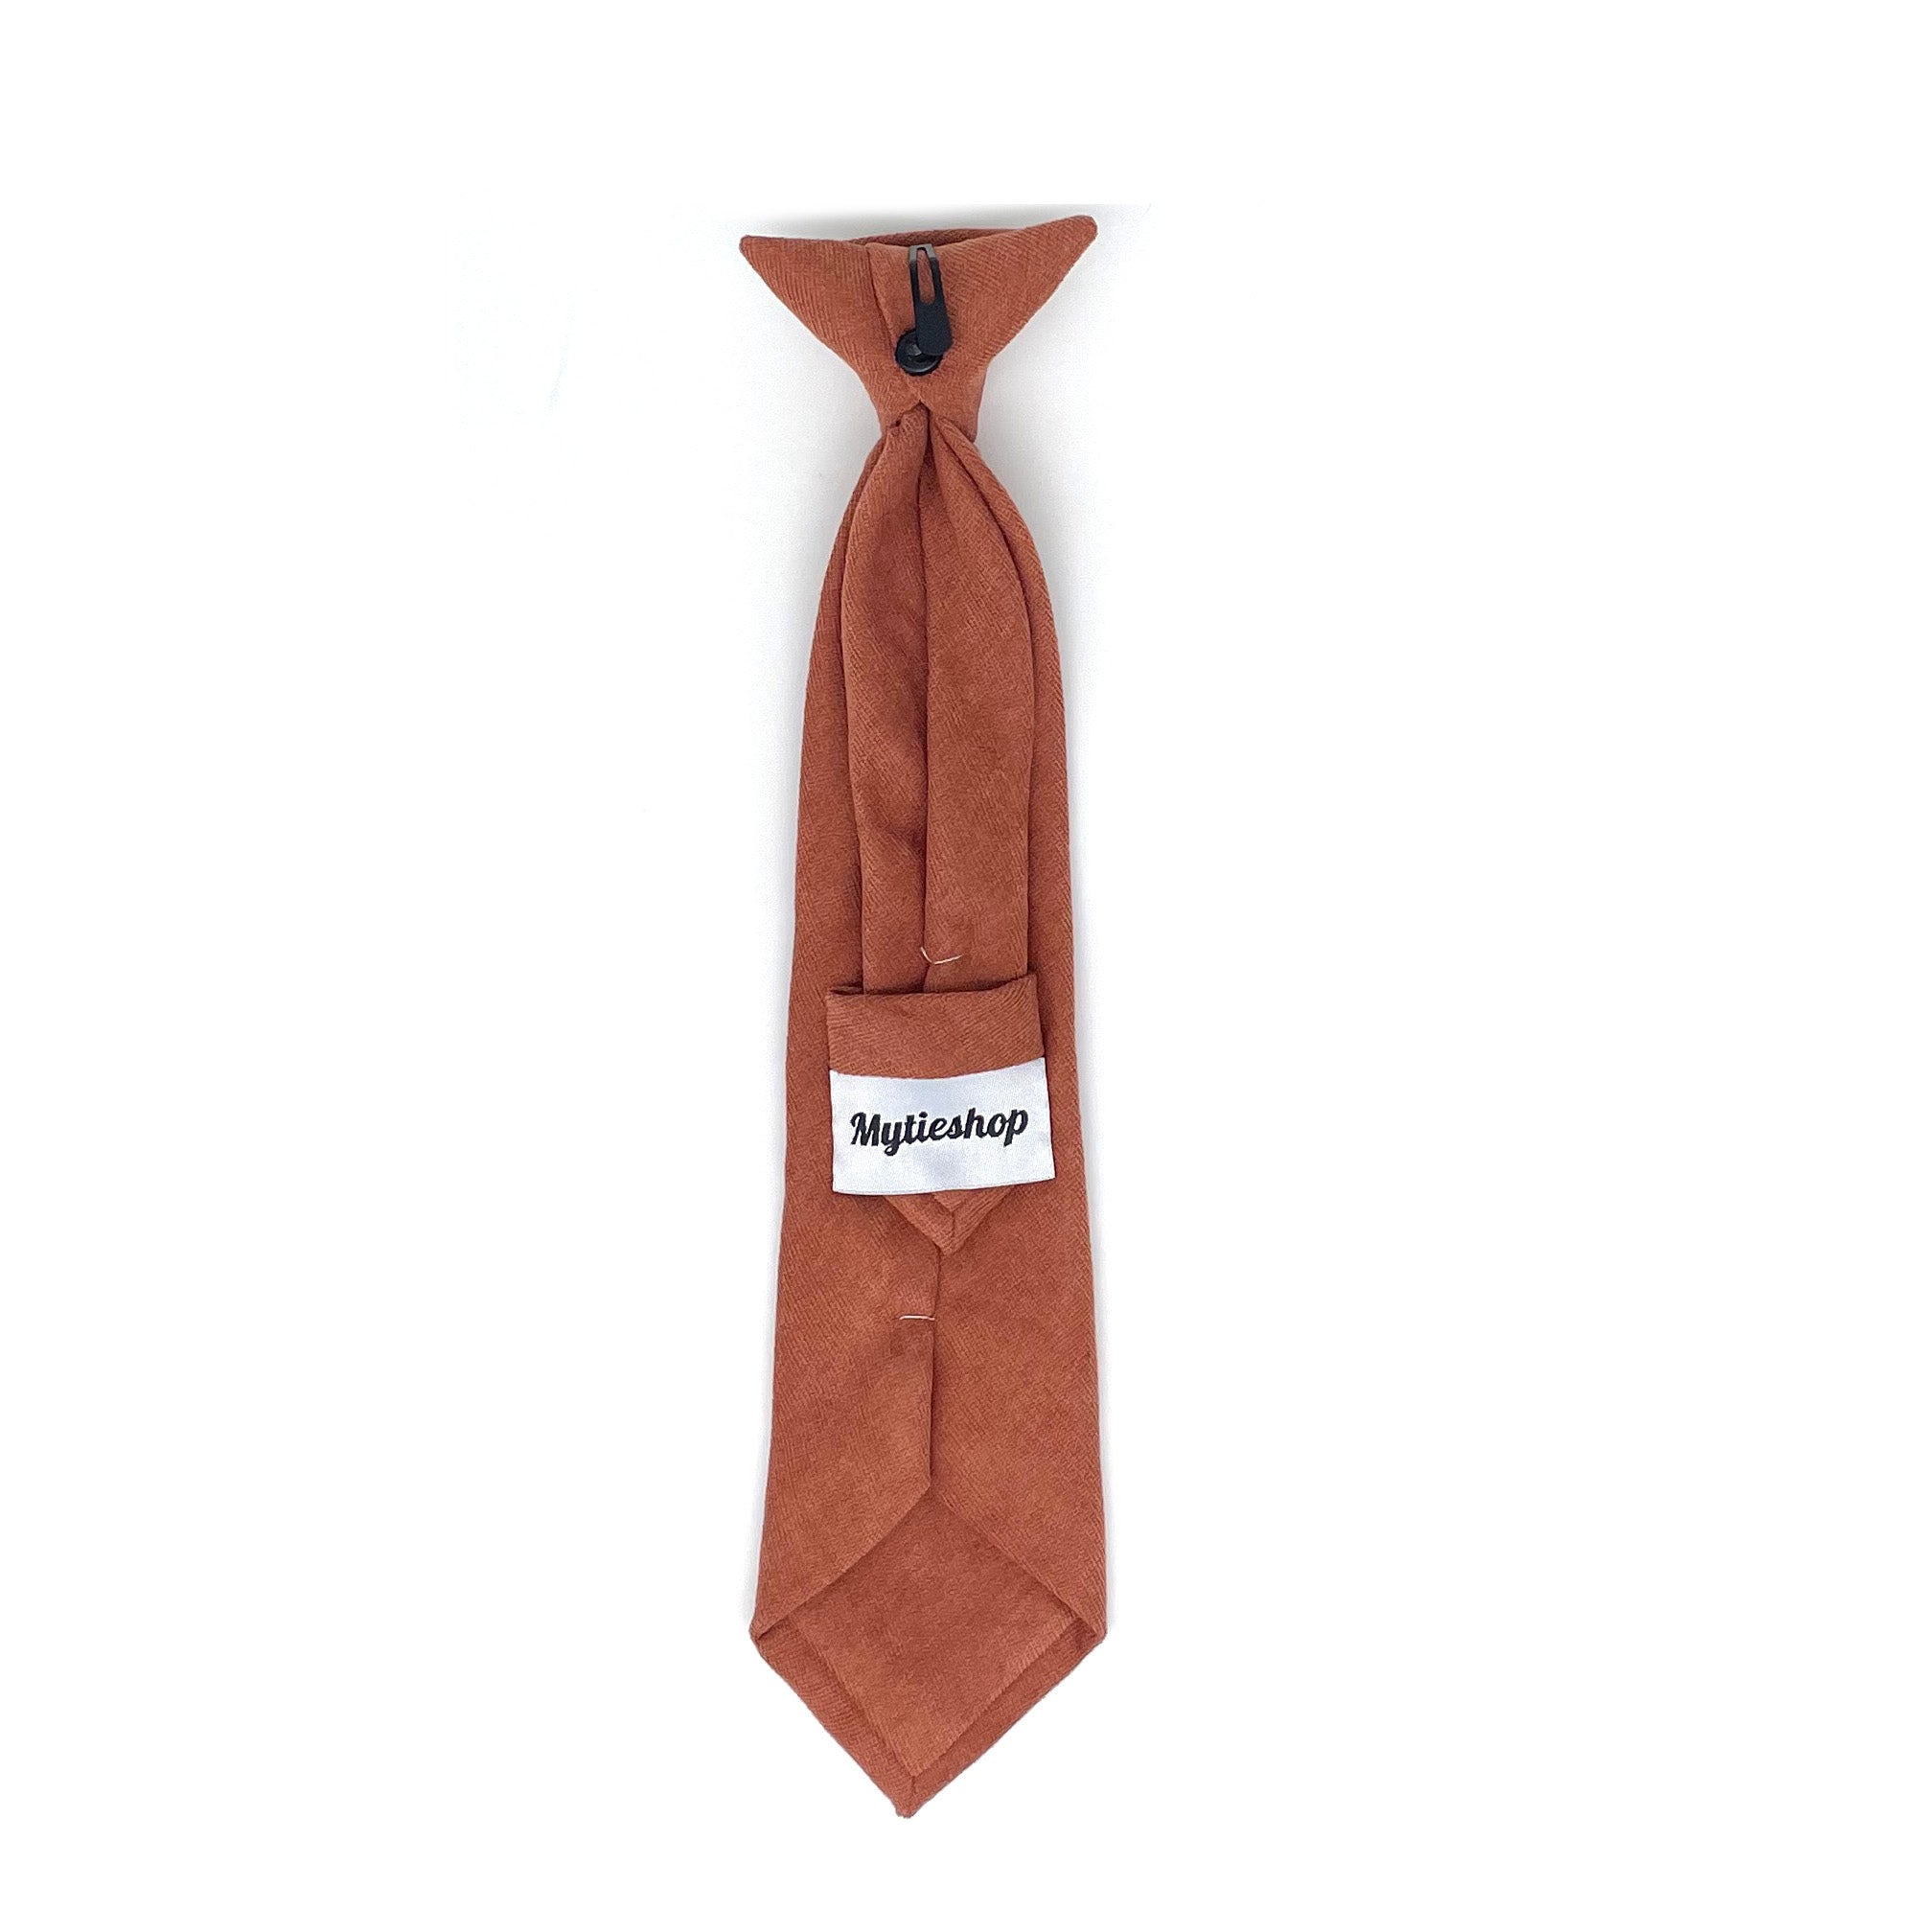 Clip on tie for kids Terracotta AUTUMN-Clip on tie for kids And Children; Junior Groomsmen Material: Suede Approx Size: Color: Terracotta Max width: 6.5 cm / 2.4 inches 9-24 months 26 CM2-5 years 31 CM9-11 Years 43 CM Add a pop of color to your little one&#39;s outfit with this Autumn Boys Floral Clip On Tie. This tie is perfect for any formal occasion, whether it&#39;s a wedding or family gathering. The clip-on design makes it easy to put on and take off, and the 2.36&quot; size is perfect for toddlers and 